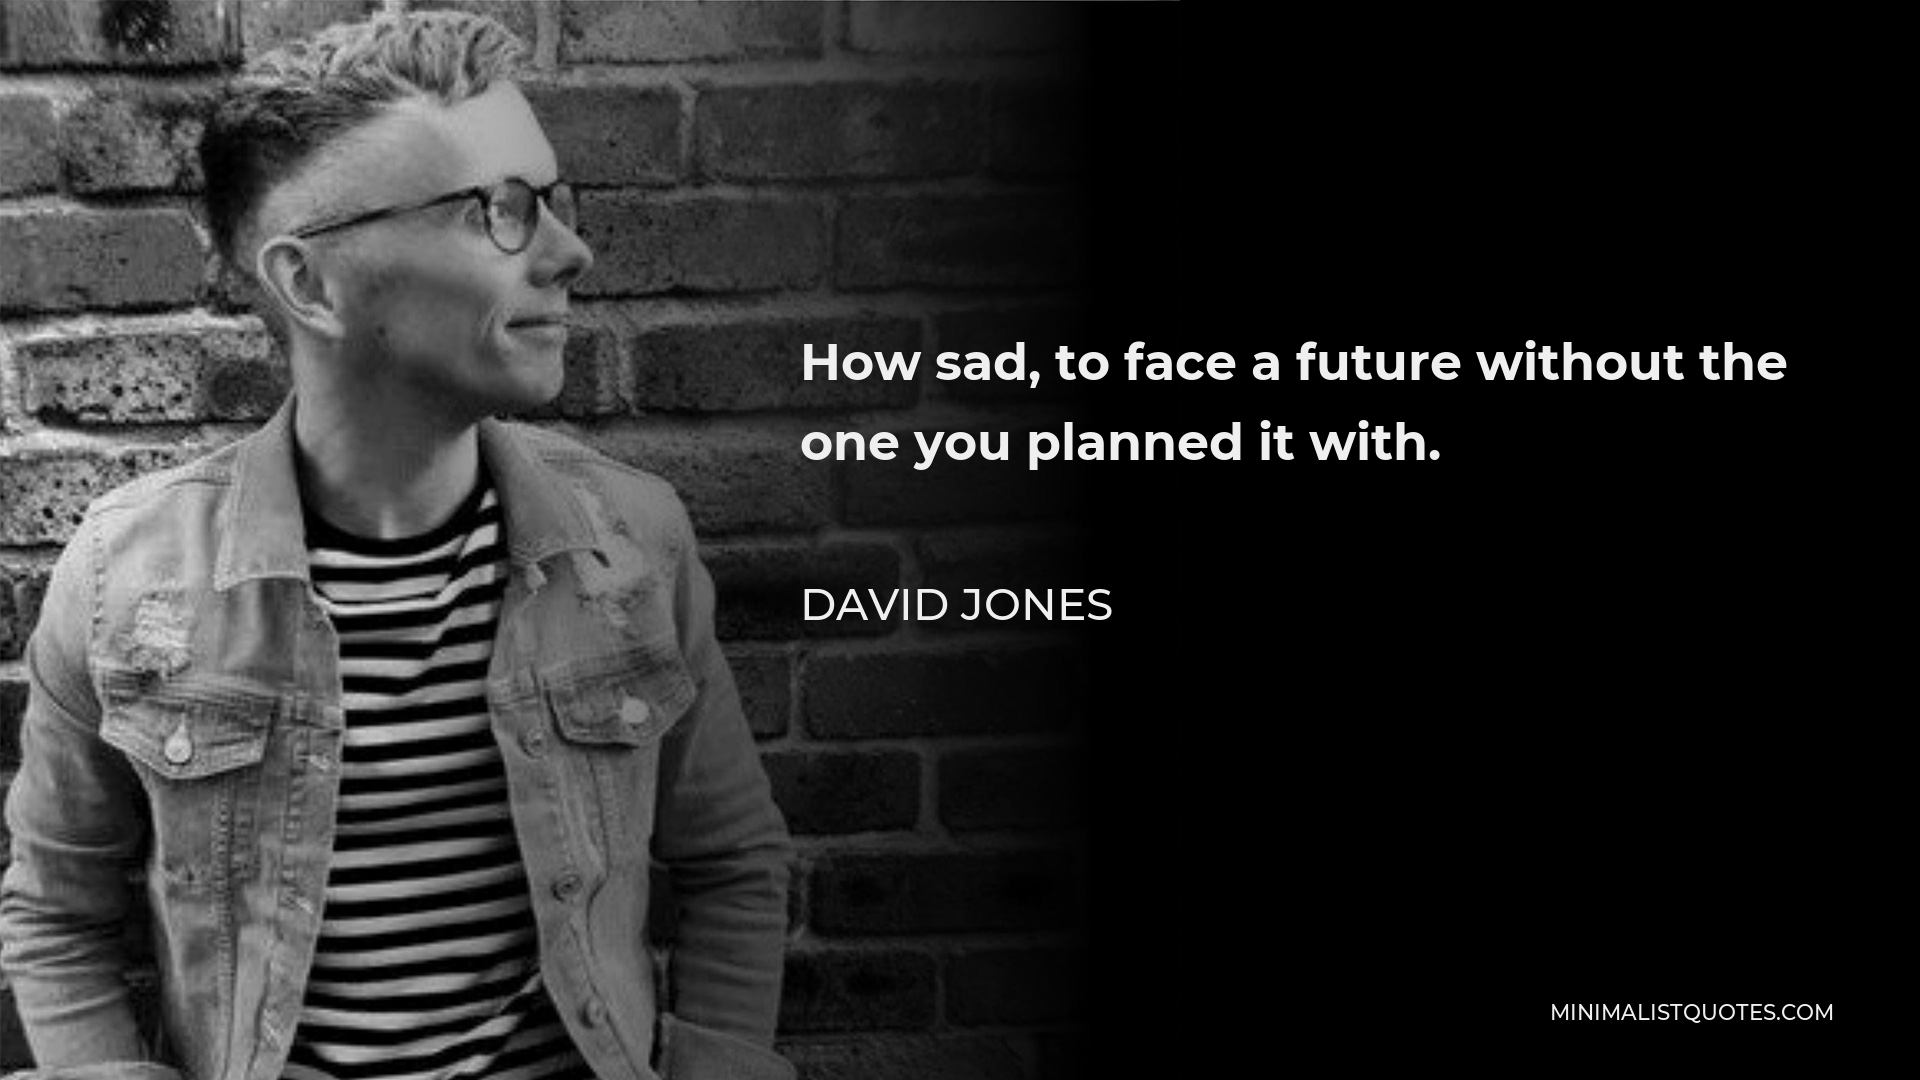 David Jones Quote - How sad, to face a future without the one you planned it with.